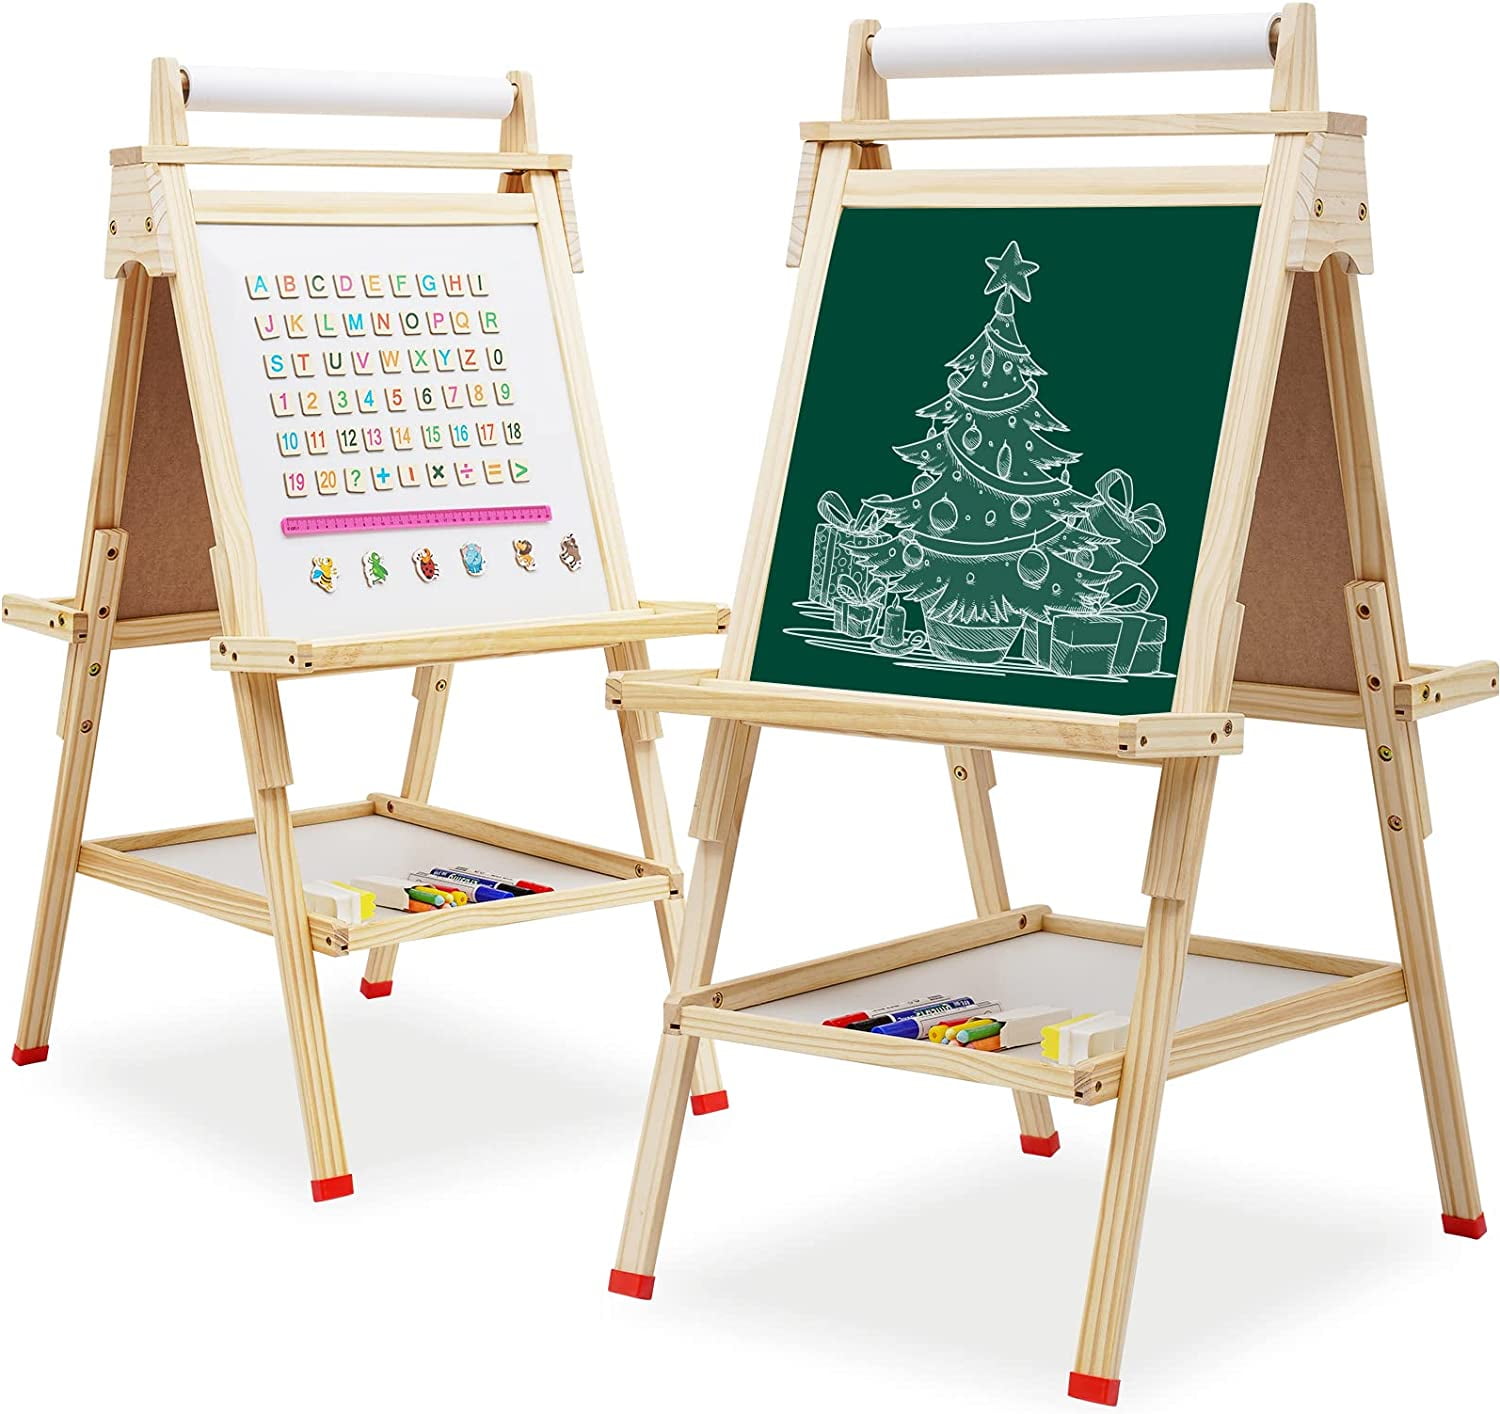 Nukied　Double-Sided　Easel　Art　Toddlers　for　Drawing　Roll　Kids　with　Kids　Easel　Easel　Paper　Whiteboard　Birthday　Wooden　Magnetic　Adjustable　Easel　Standing　Chalkboard　Holiday　Gifts